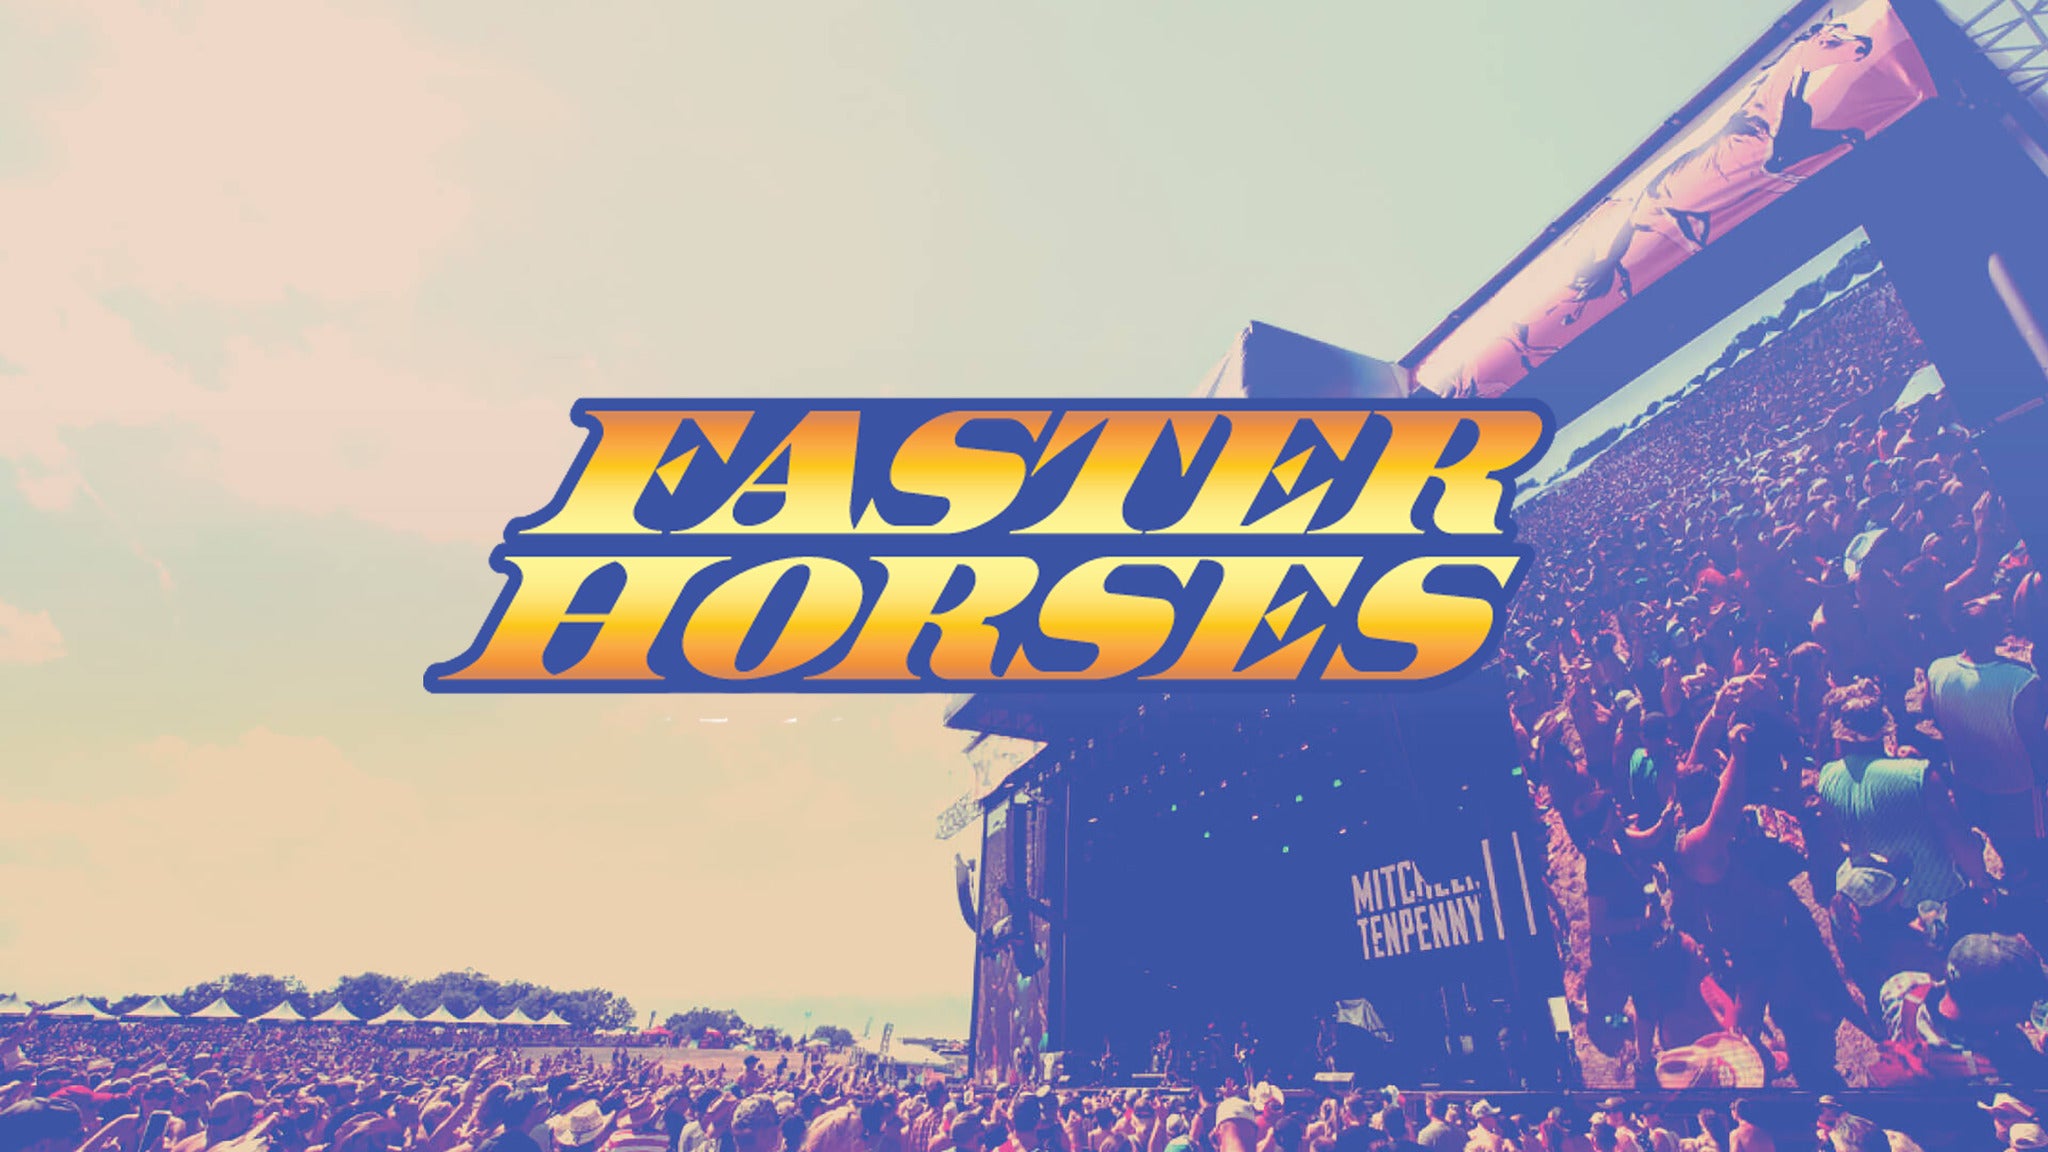 Faster Horses Festival Tickets, 2022-2023 Concert Tour Dates | Ticketmaster